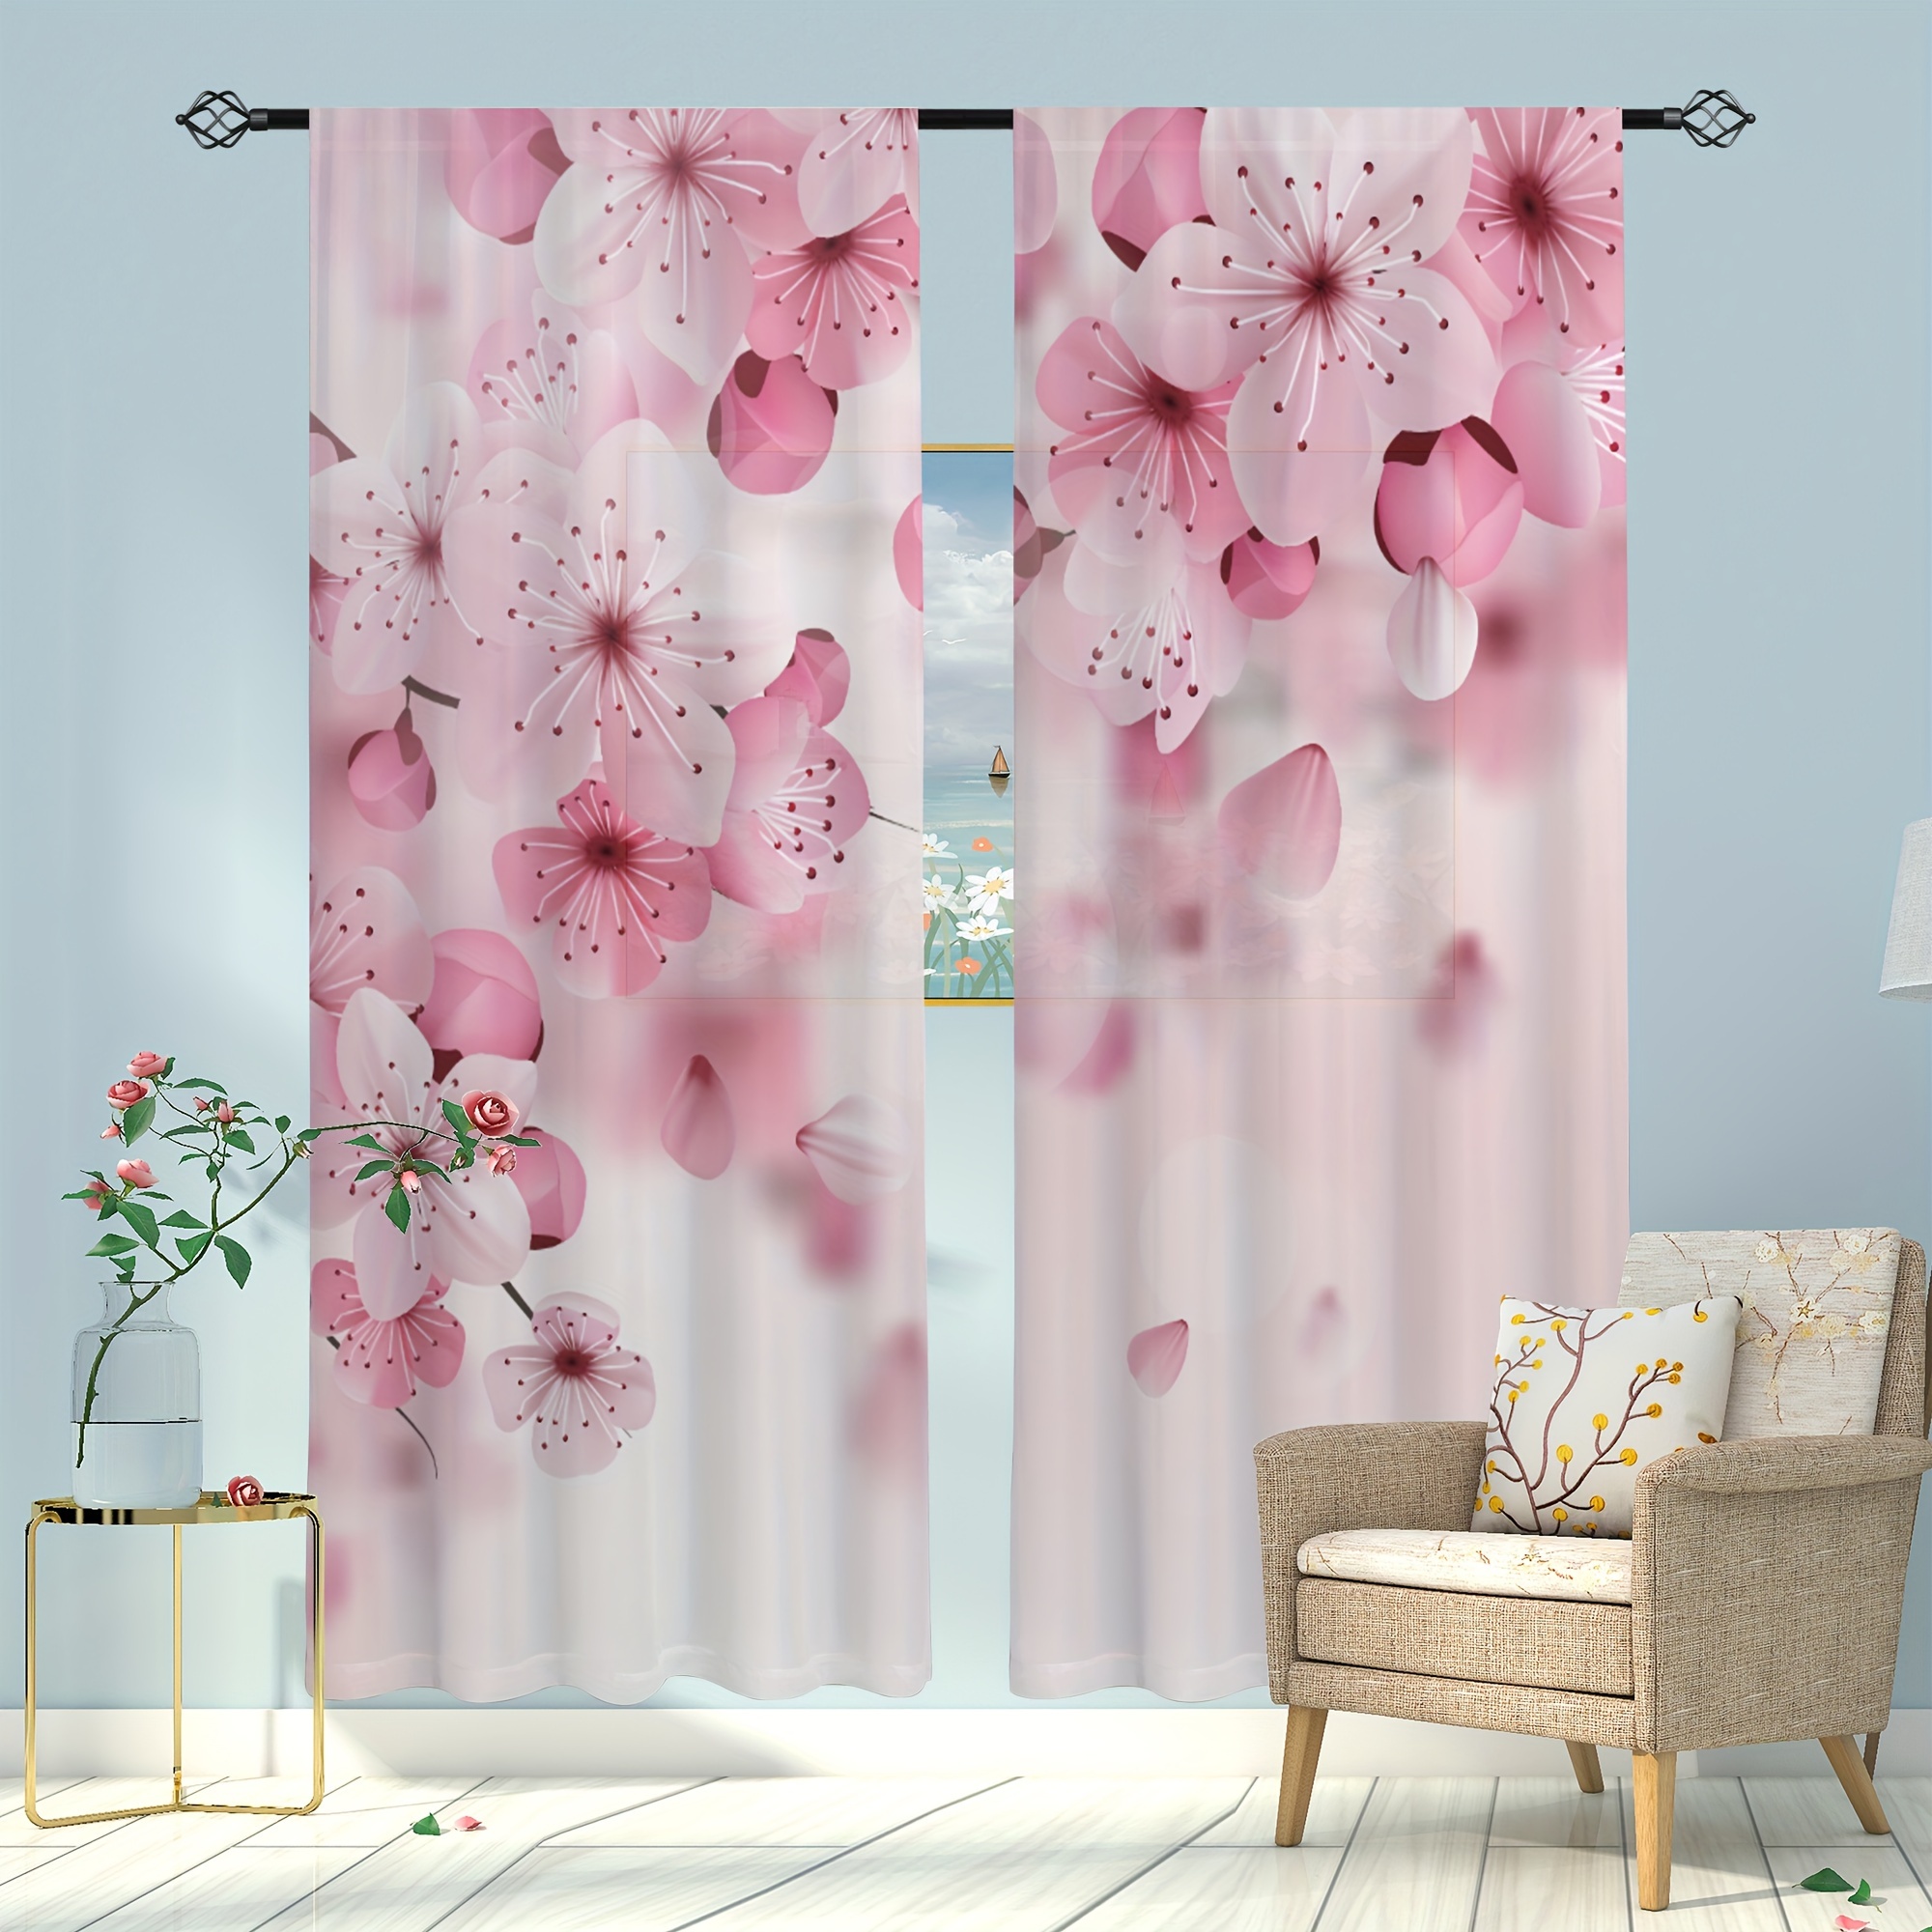 

Contemporary Sakura Print Semi-sheer Curtain Panels, 2-piece Rod Pocket Decorative Drapes For Living Room Bedroom, Machine Washable Polyester, Floral Pattern Home Decor